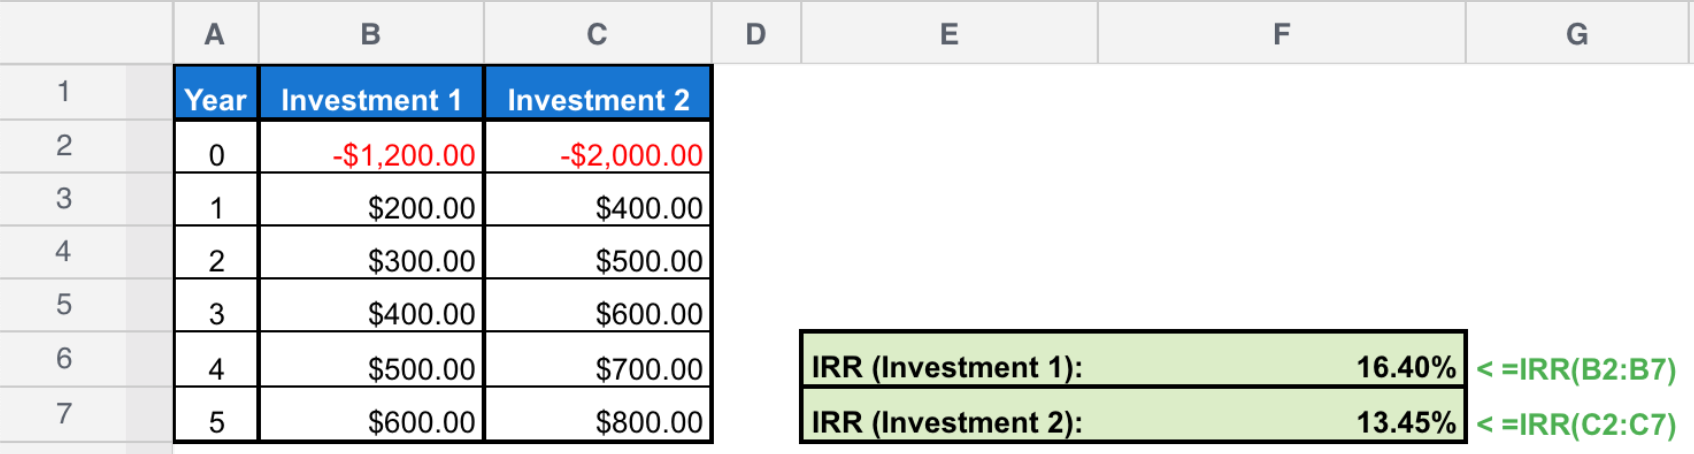 IRR-Function-Comparing-Two-Investments.png